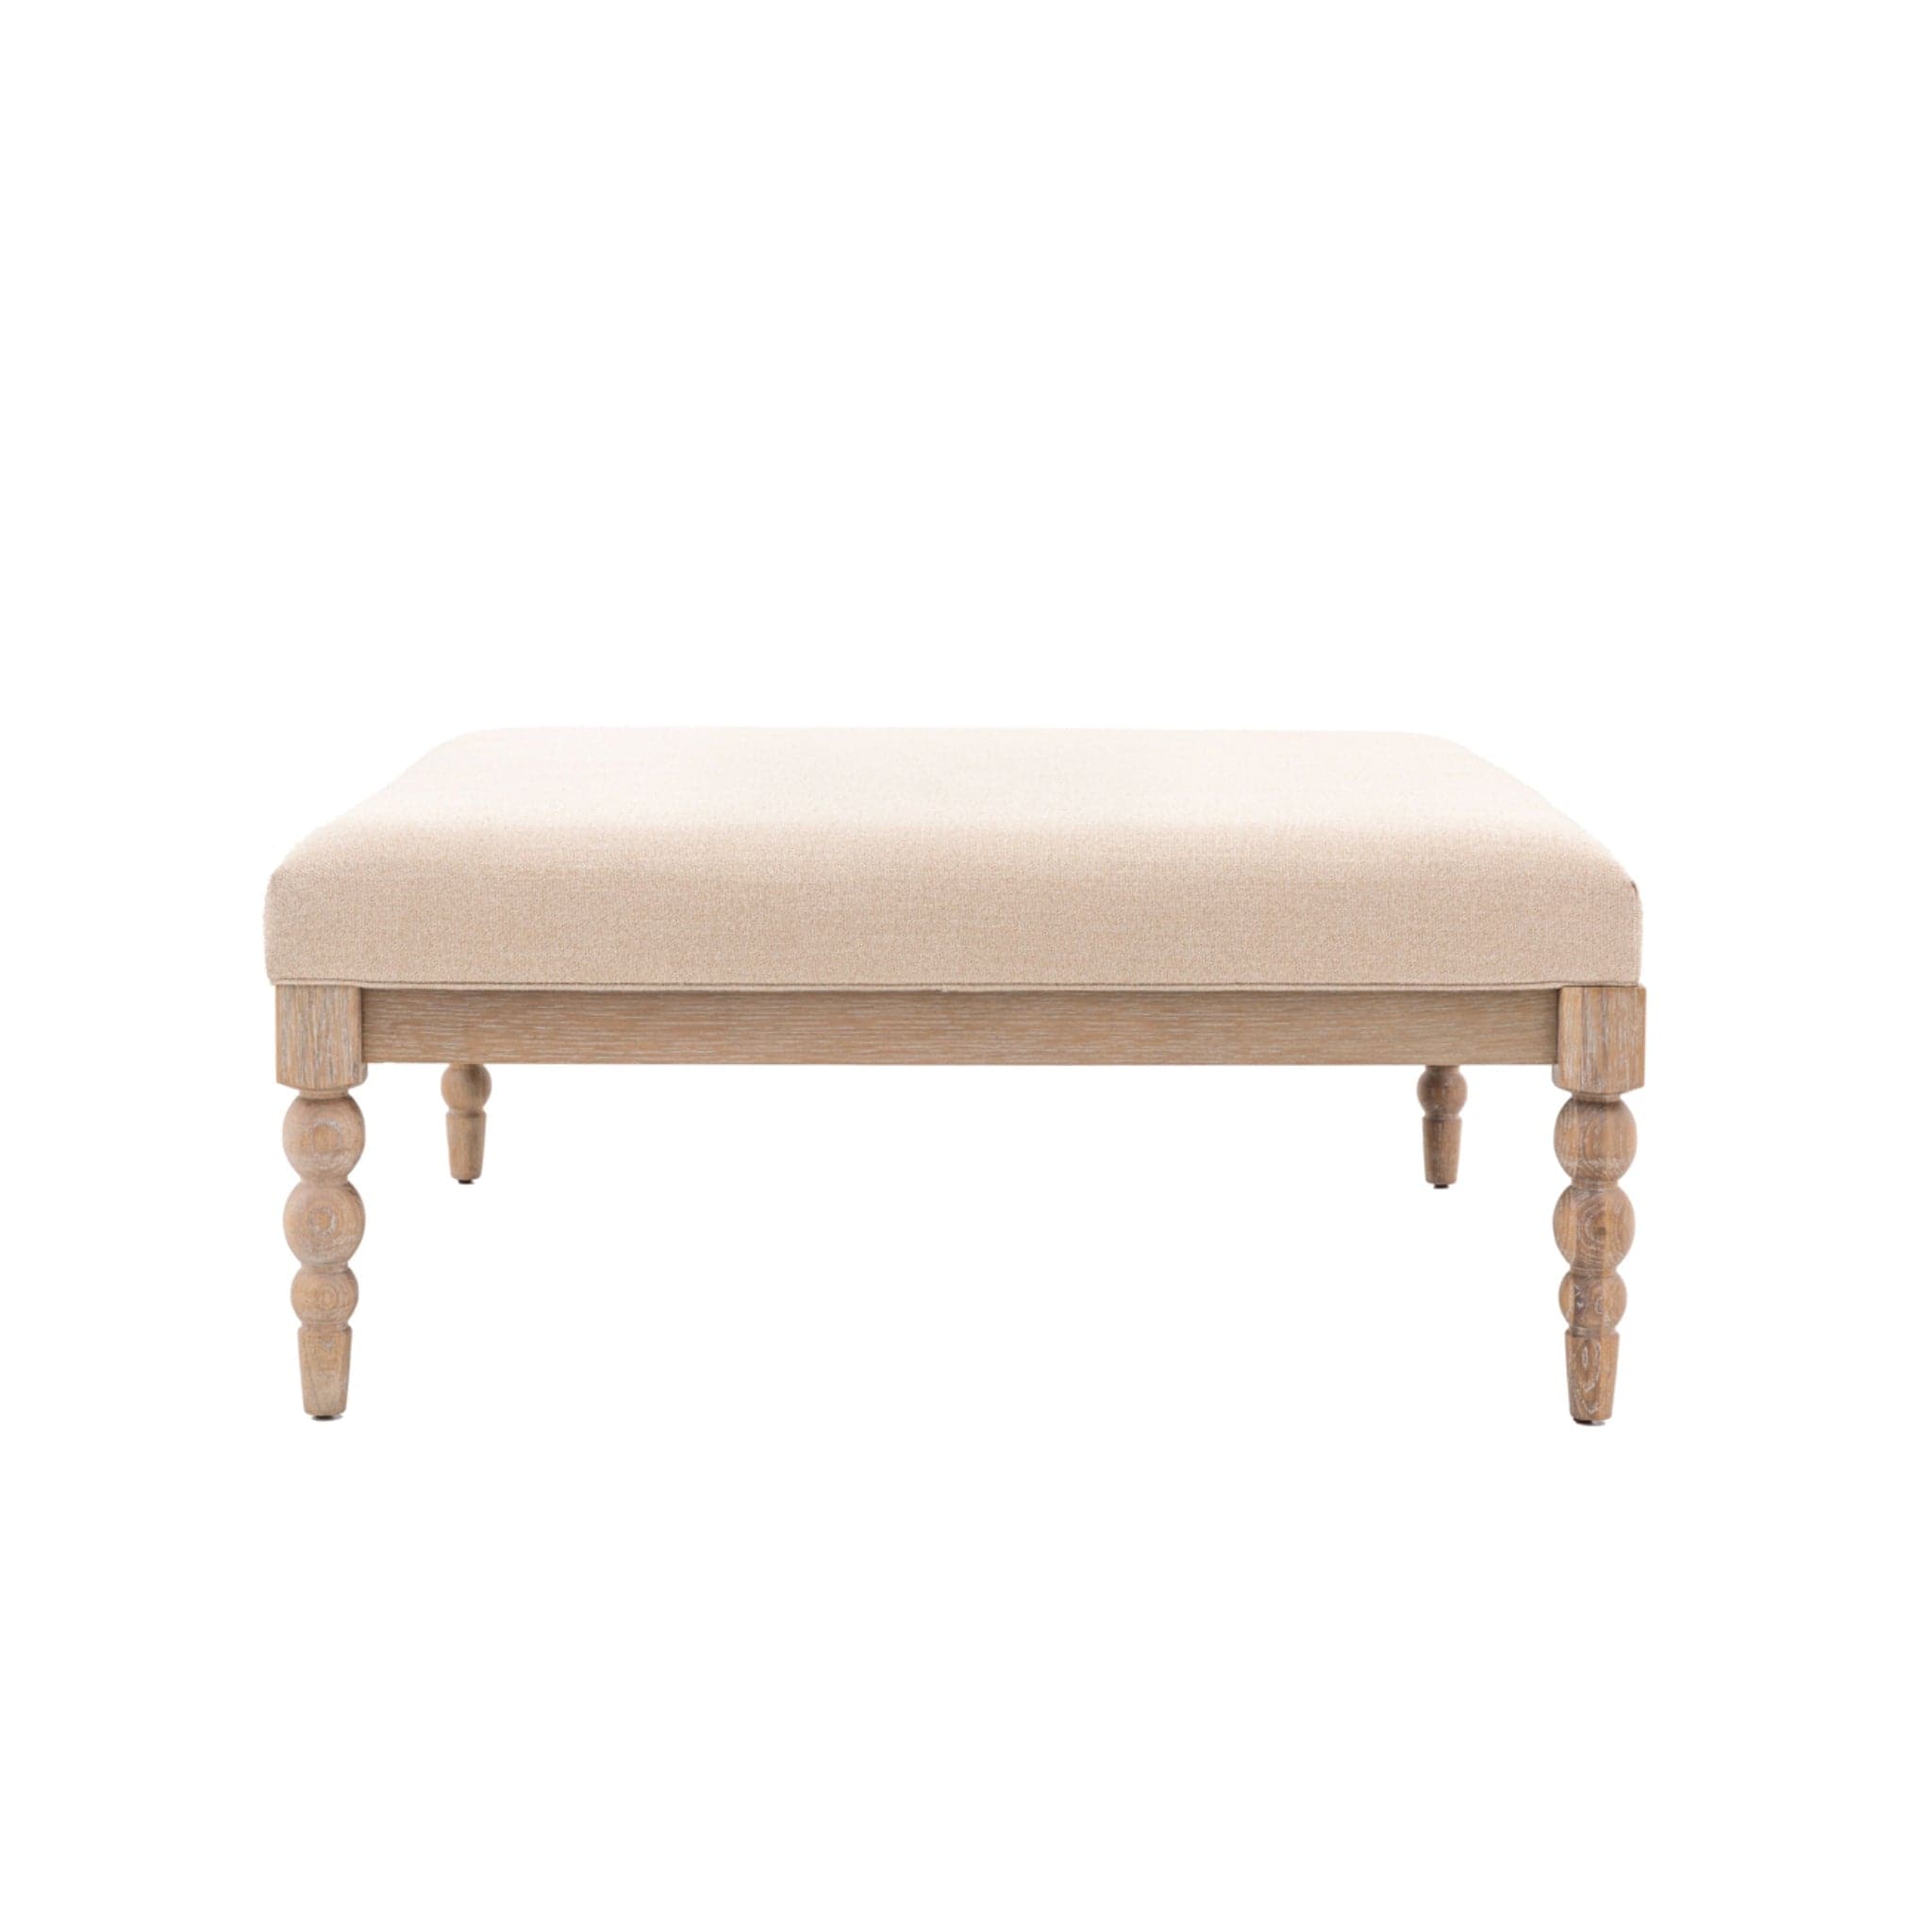 Beaded Edge Oak Coffee Table with Padded Fabric Top - The Farthing